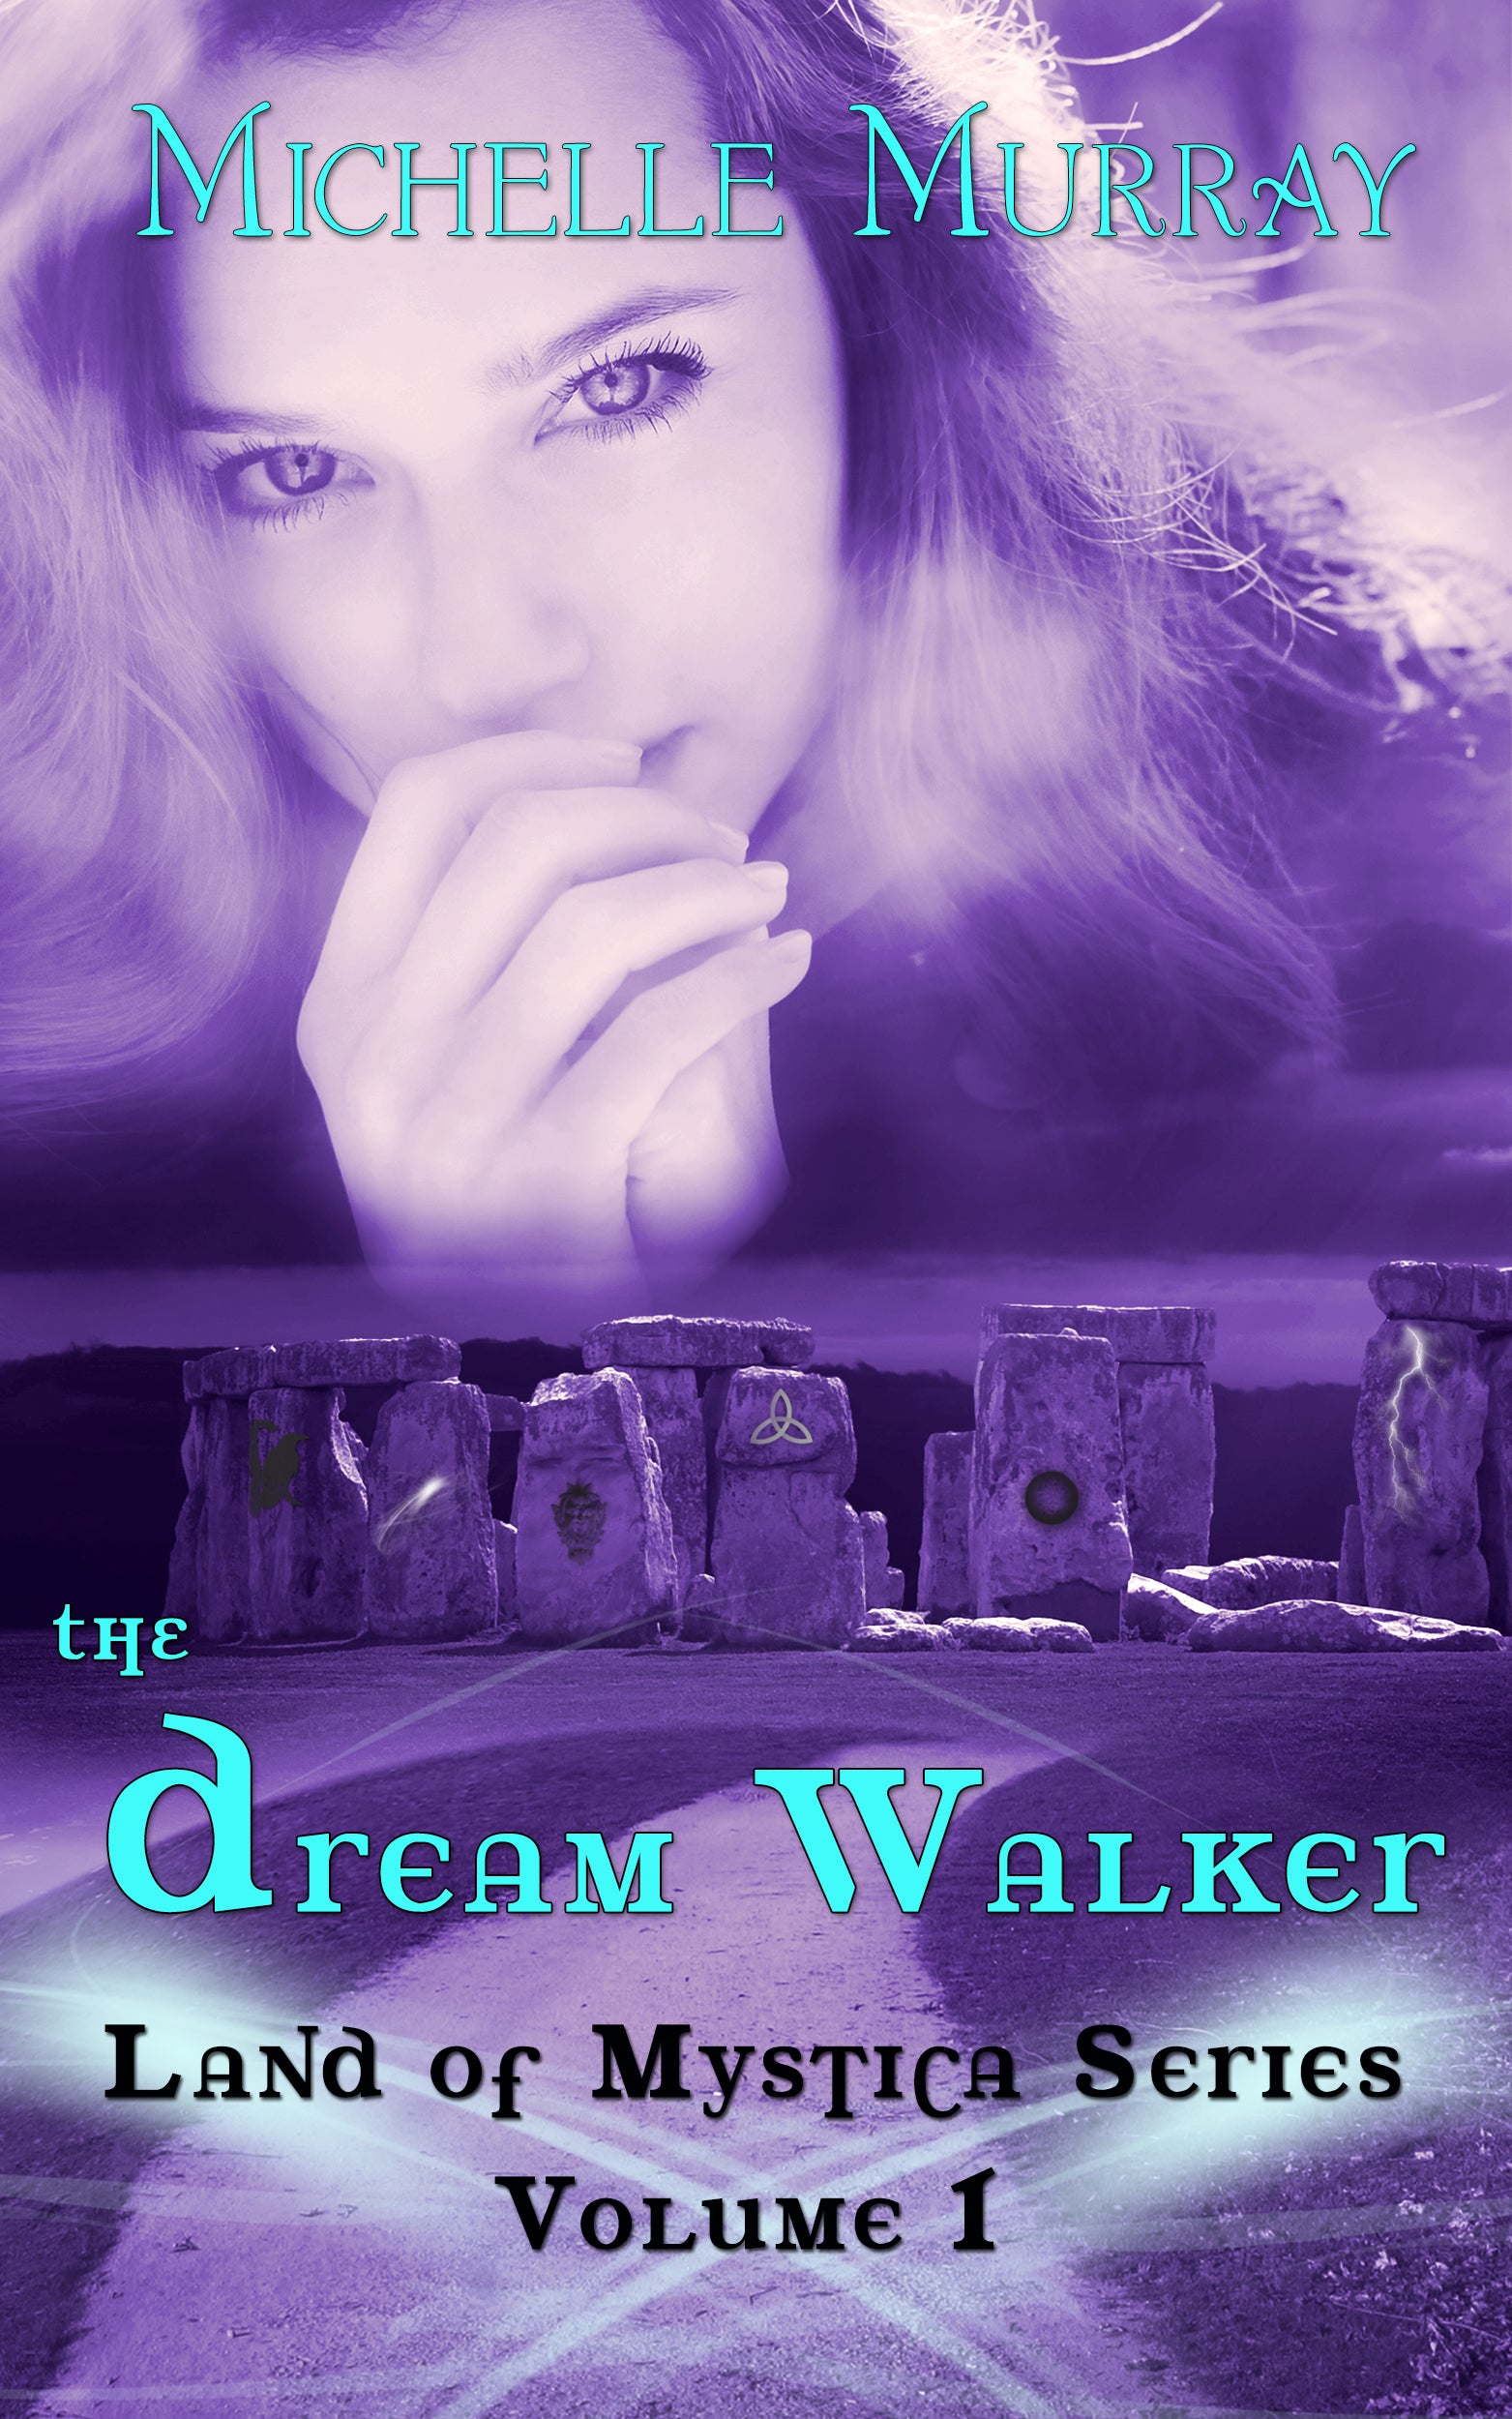 Book Review: The Dream Walker by Michelle Murray